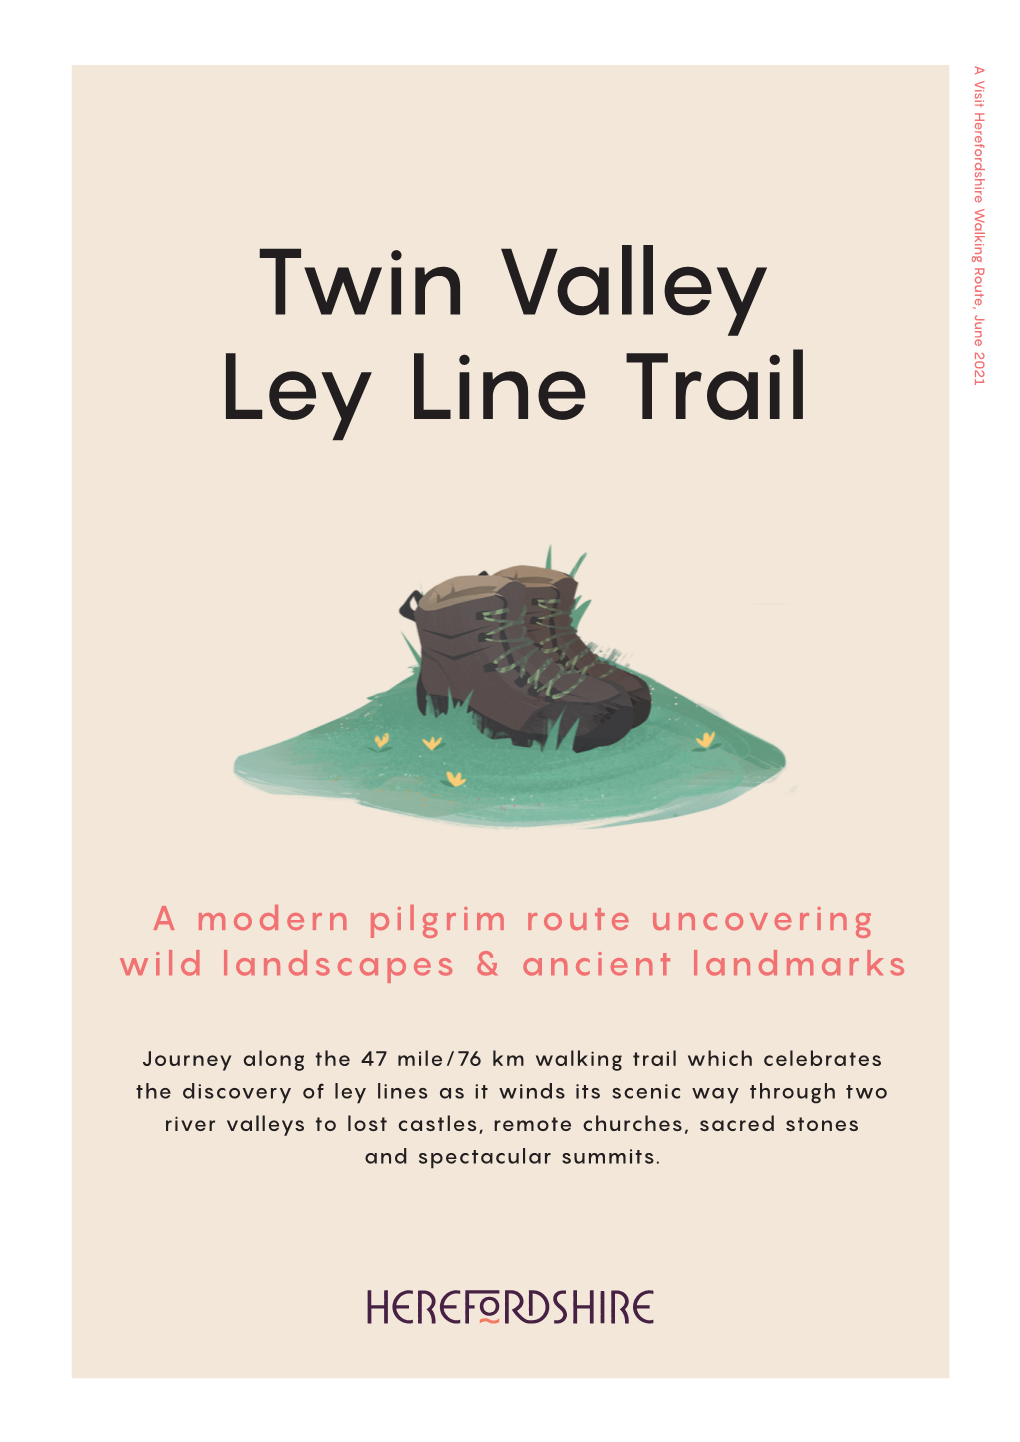 Twin Valley Ley Line Trail